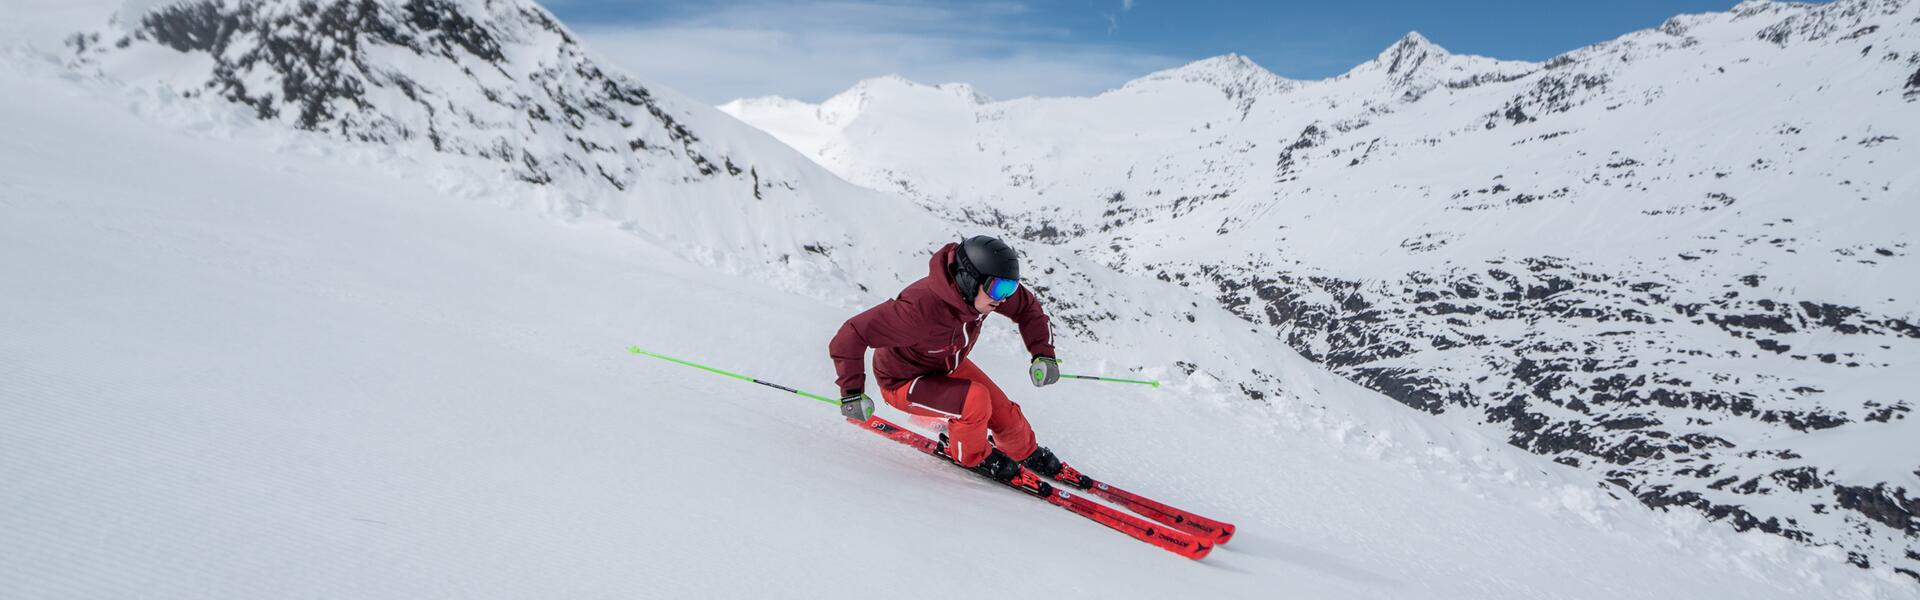 Skiing at the Hohe Mut in Obergurgl | © Scheiber Sport 